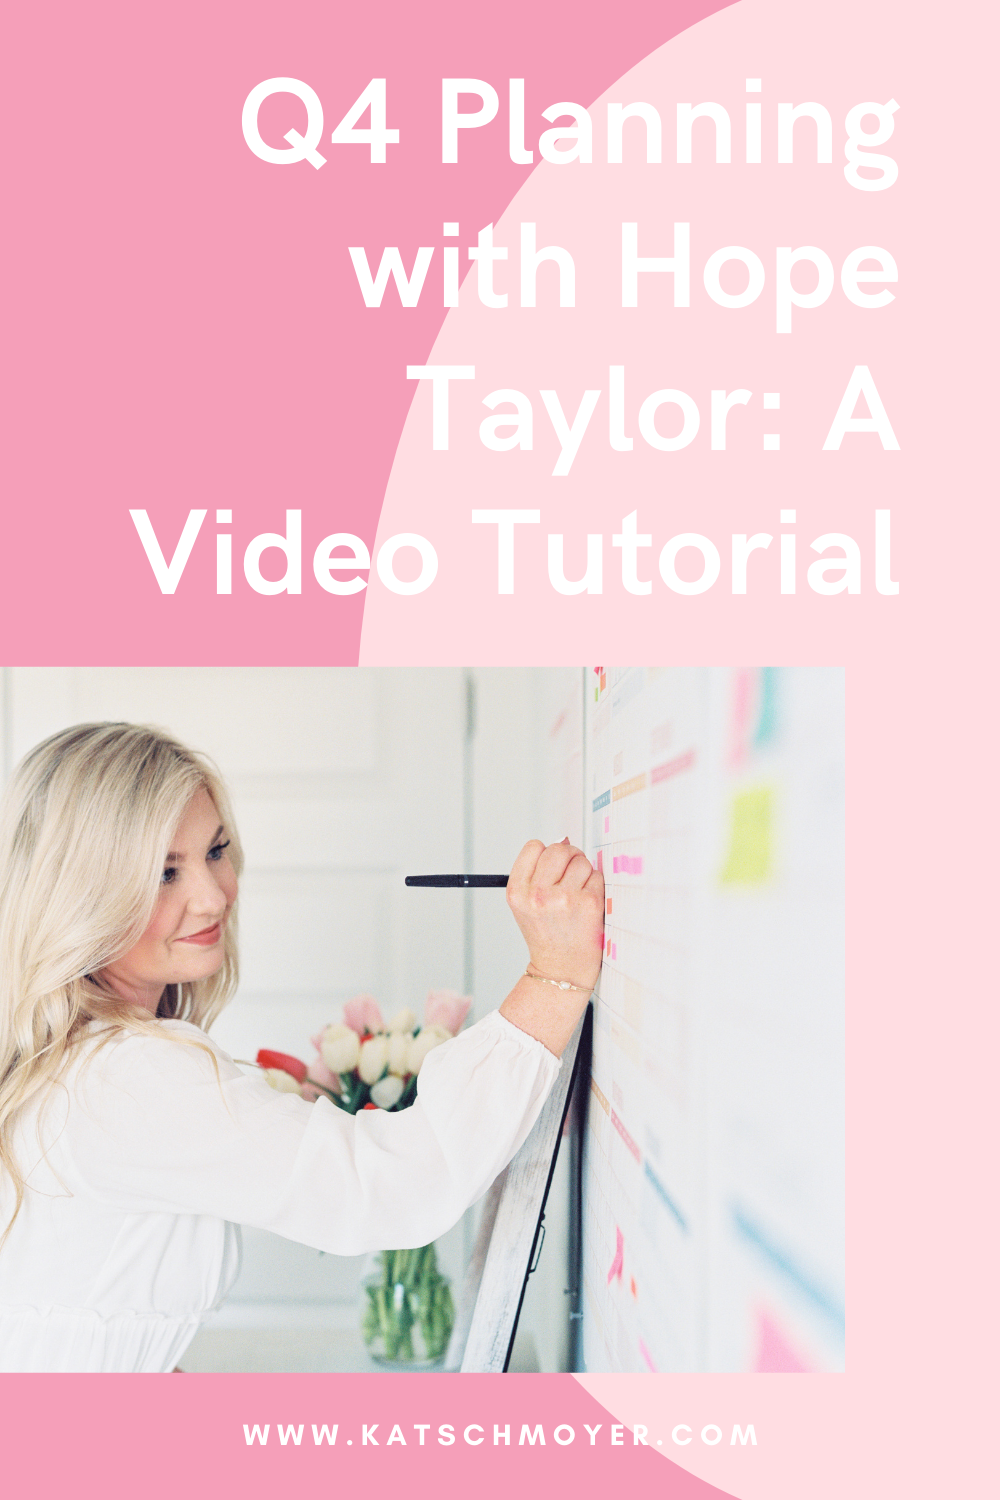 Q4 Planning with Hope Taylor using Quarterly Calendars from Kat Schmoyer: tips and tricks to plan a successful Q4 with calendars for small business owners